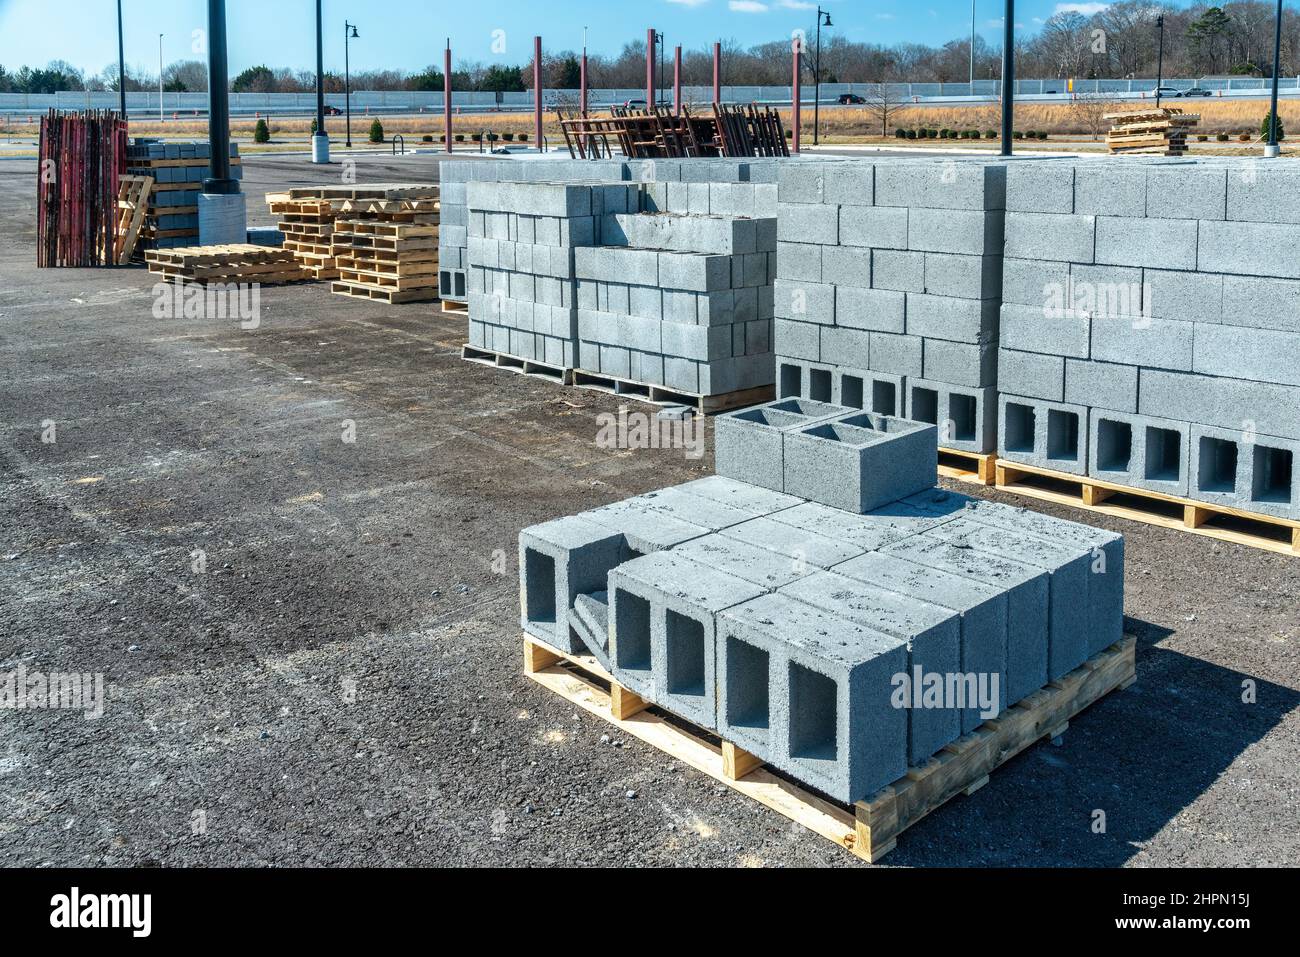 Horizontal shot of pallets of new cinder blocks at an industrial construction site. Stock Photo